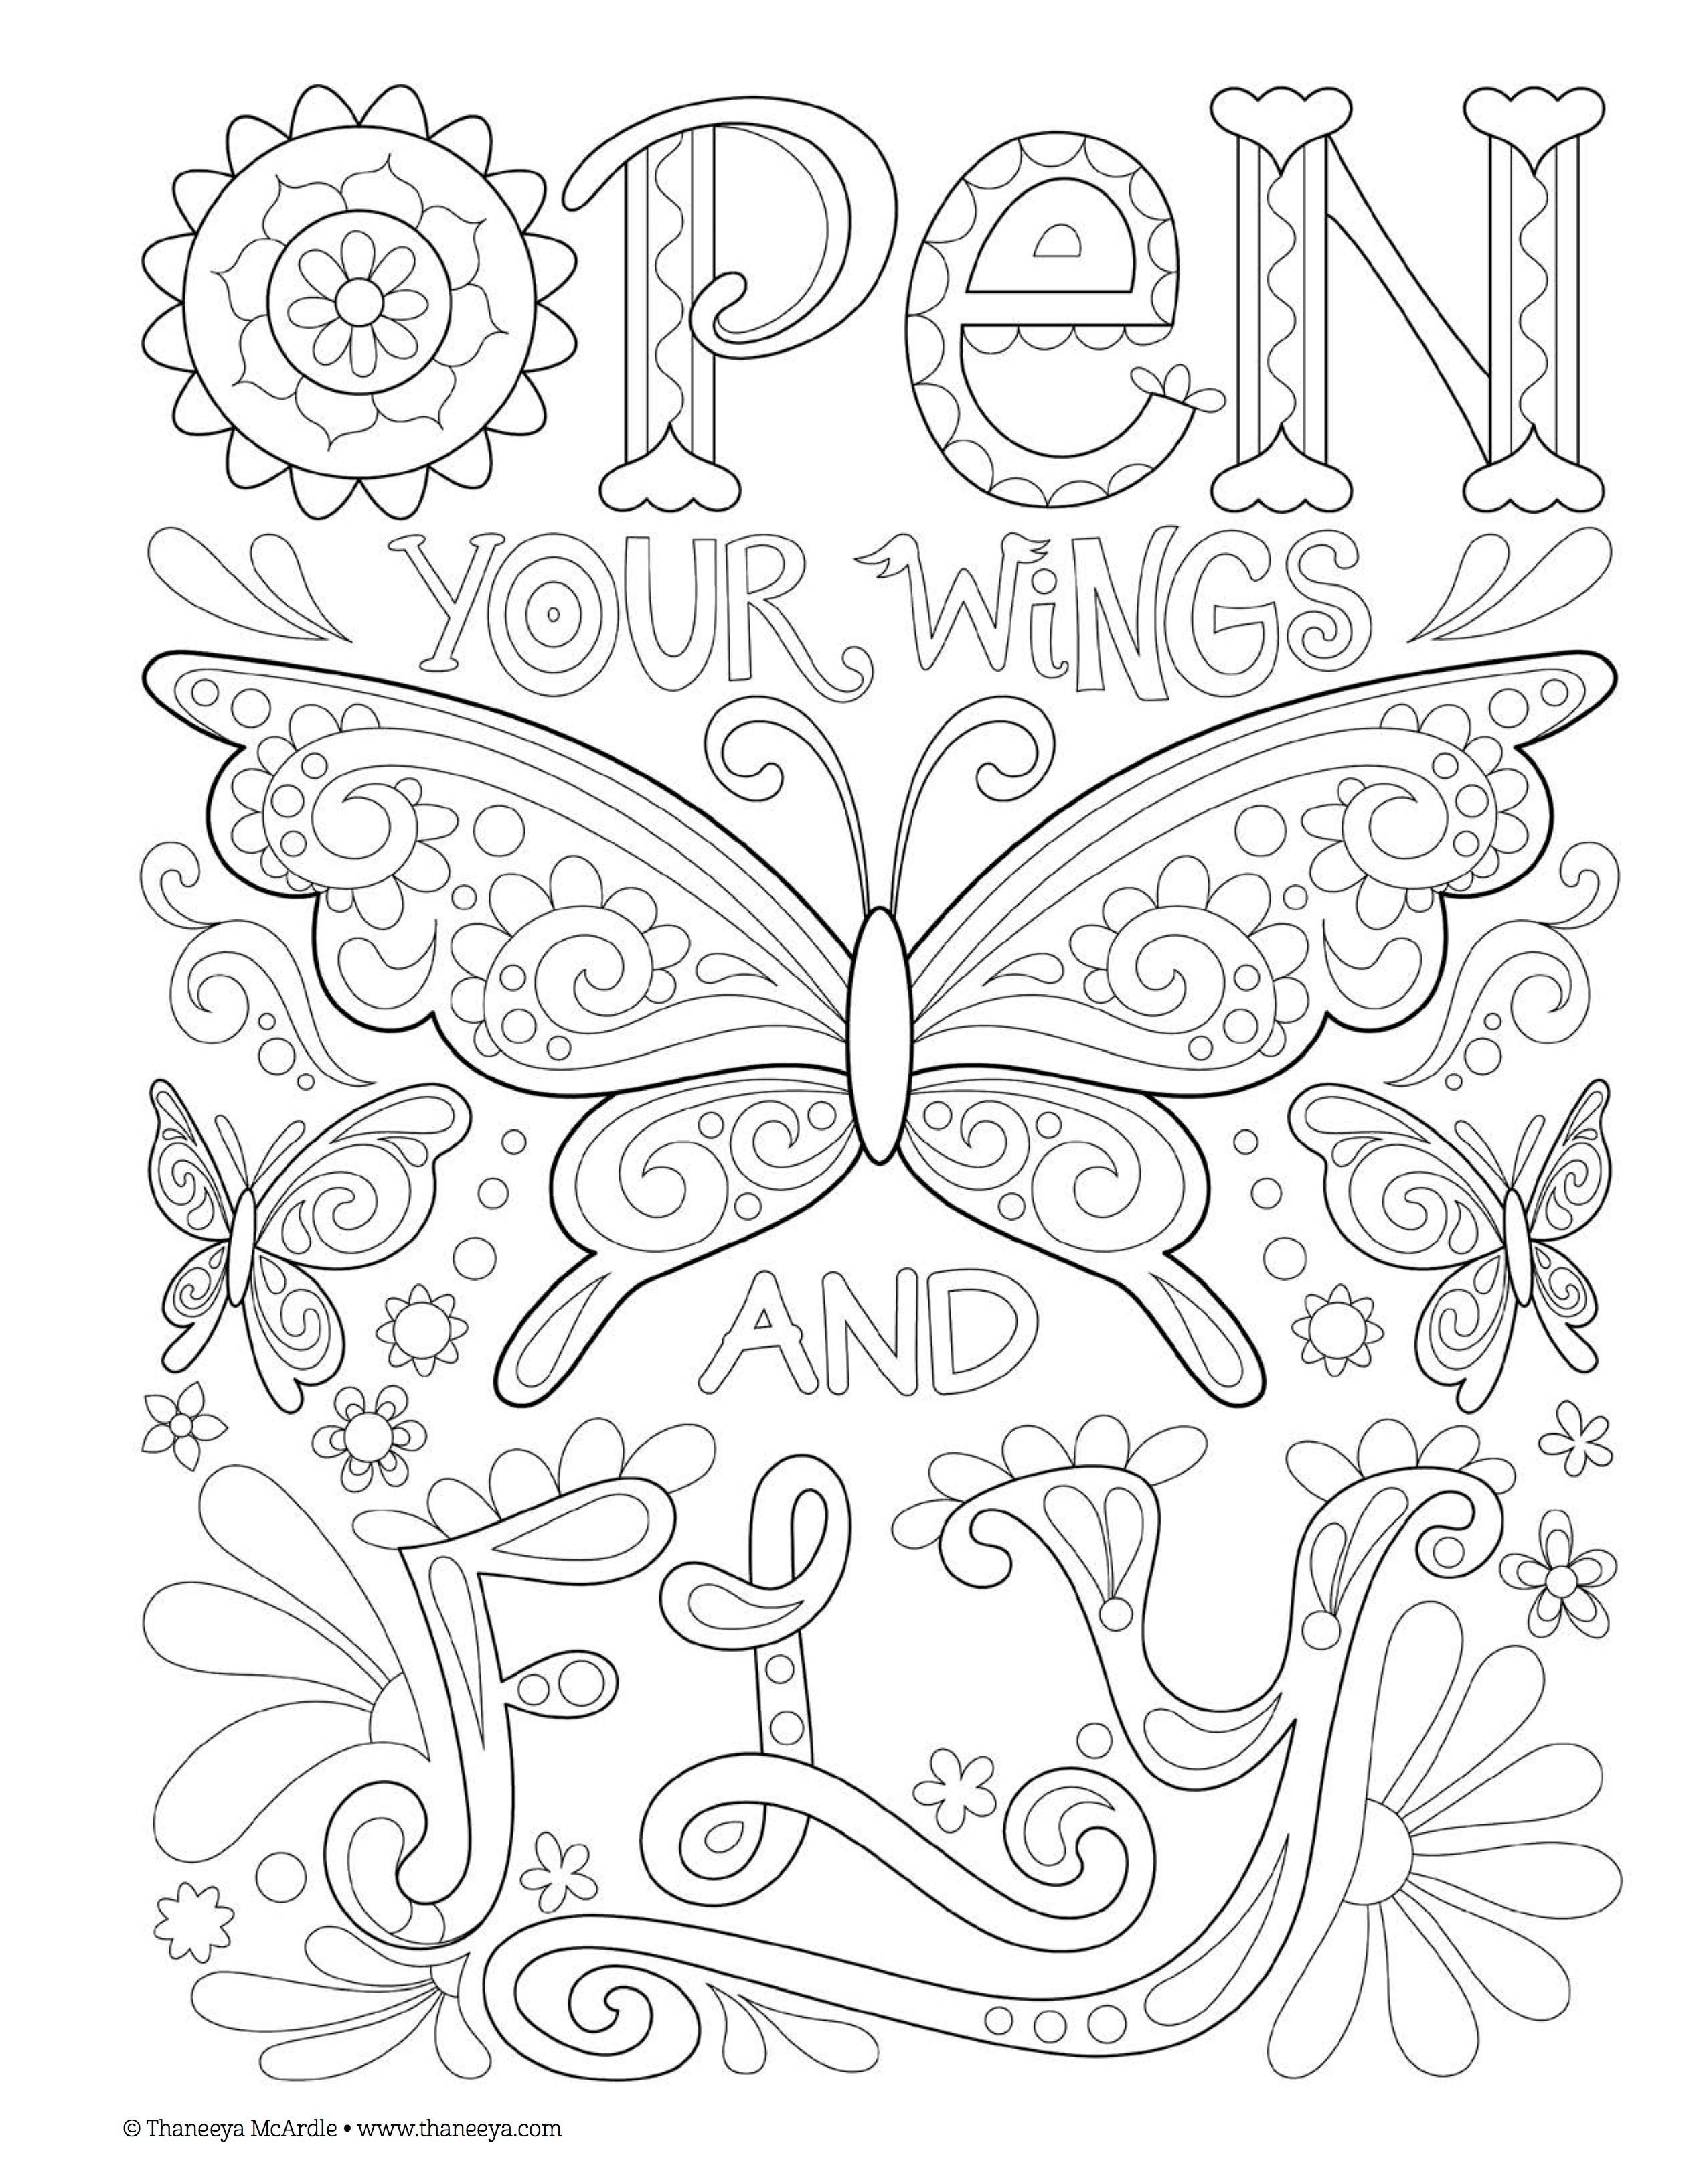 Good Vibes Coloring Book (Coloring Is Fun): Thaneeya McArdle:  9781574219951: Amazon.com: Books | Love coloring pages, Coloring books, Coloring  pages